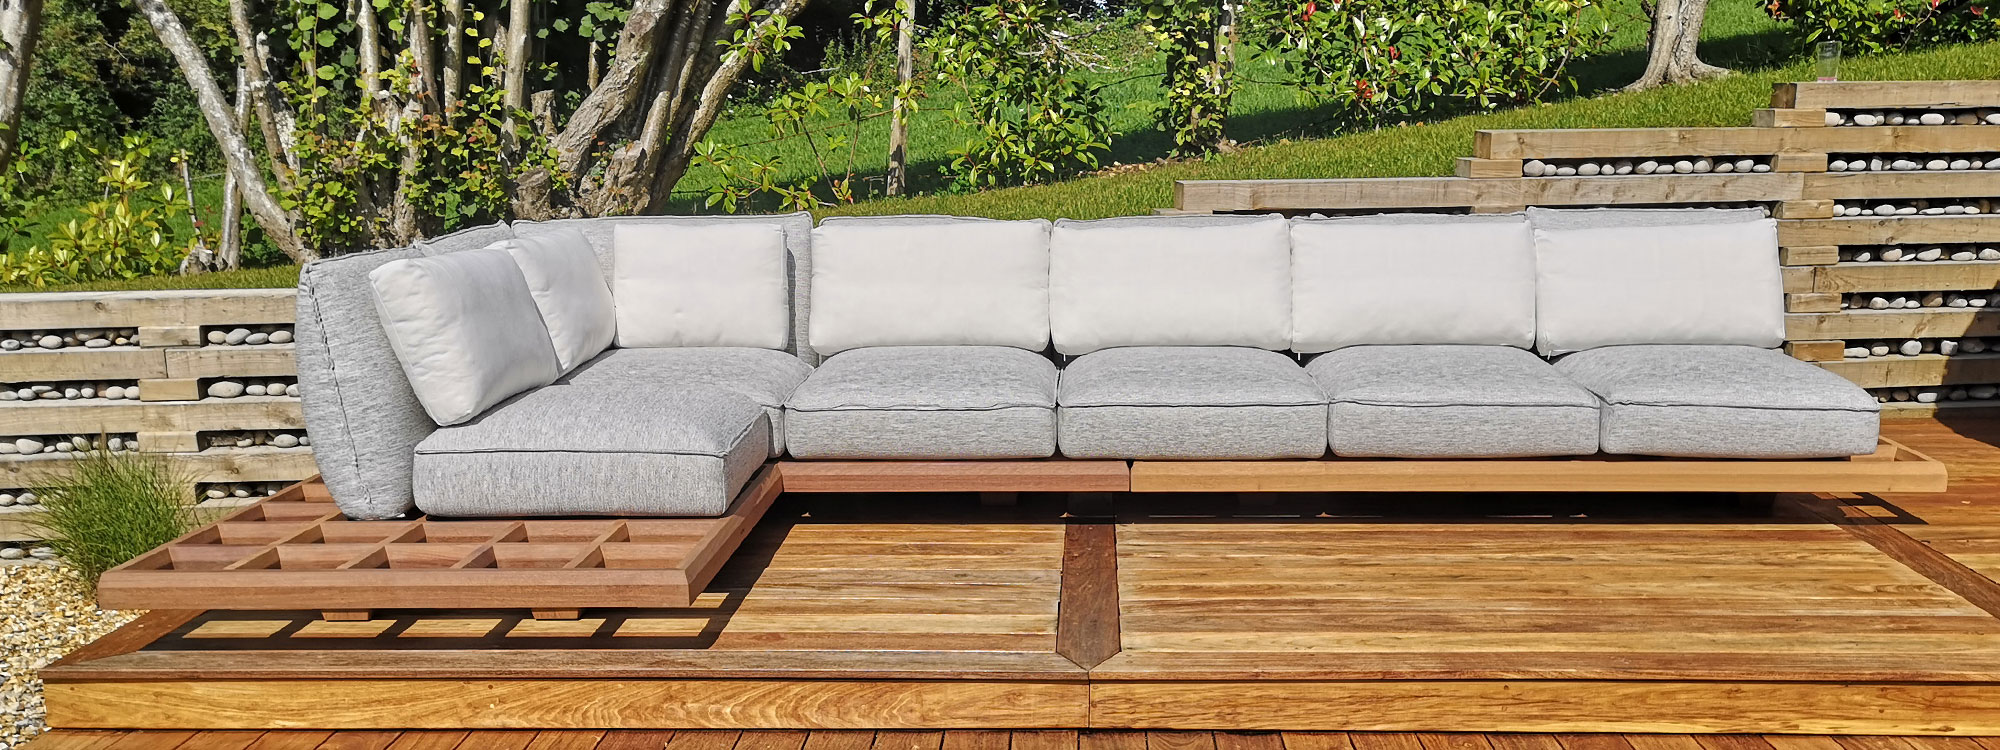 picture of super comfy luxury outdoor wooden lounge sofa